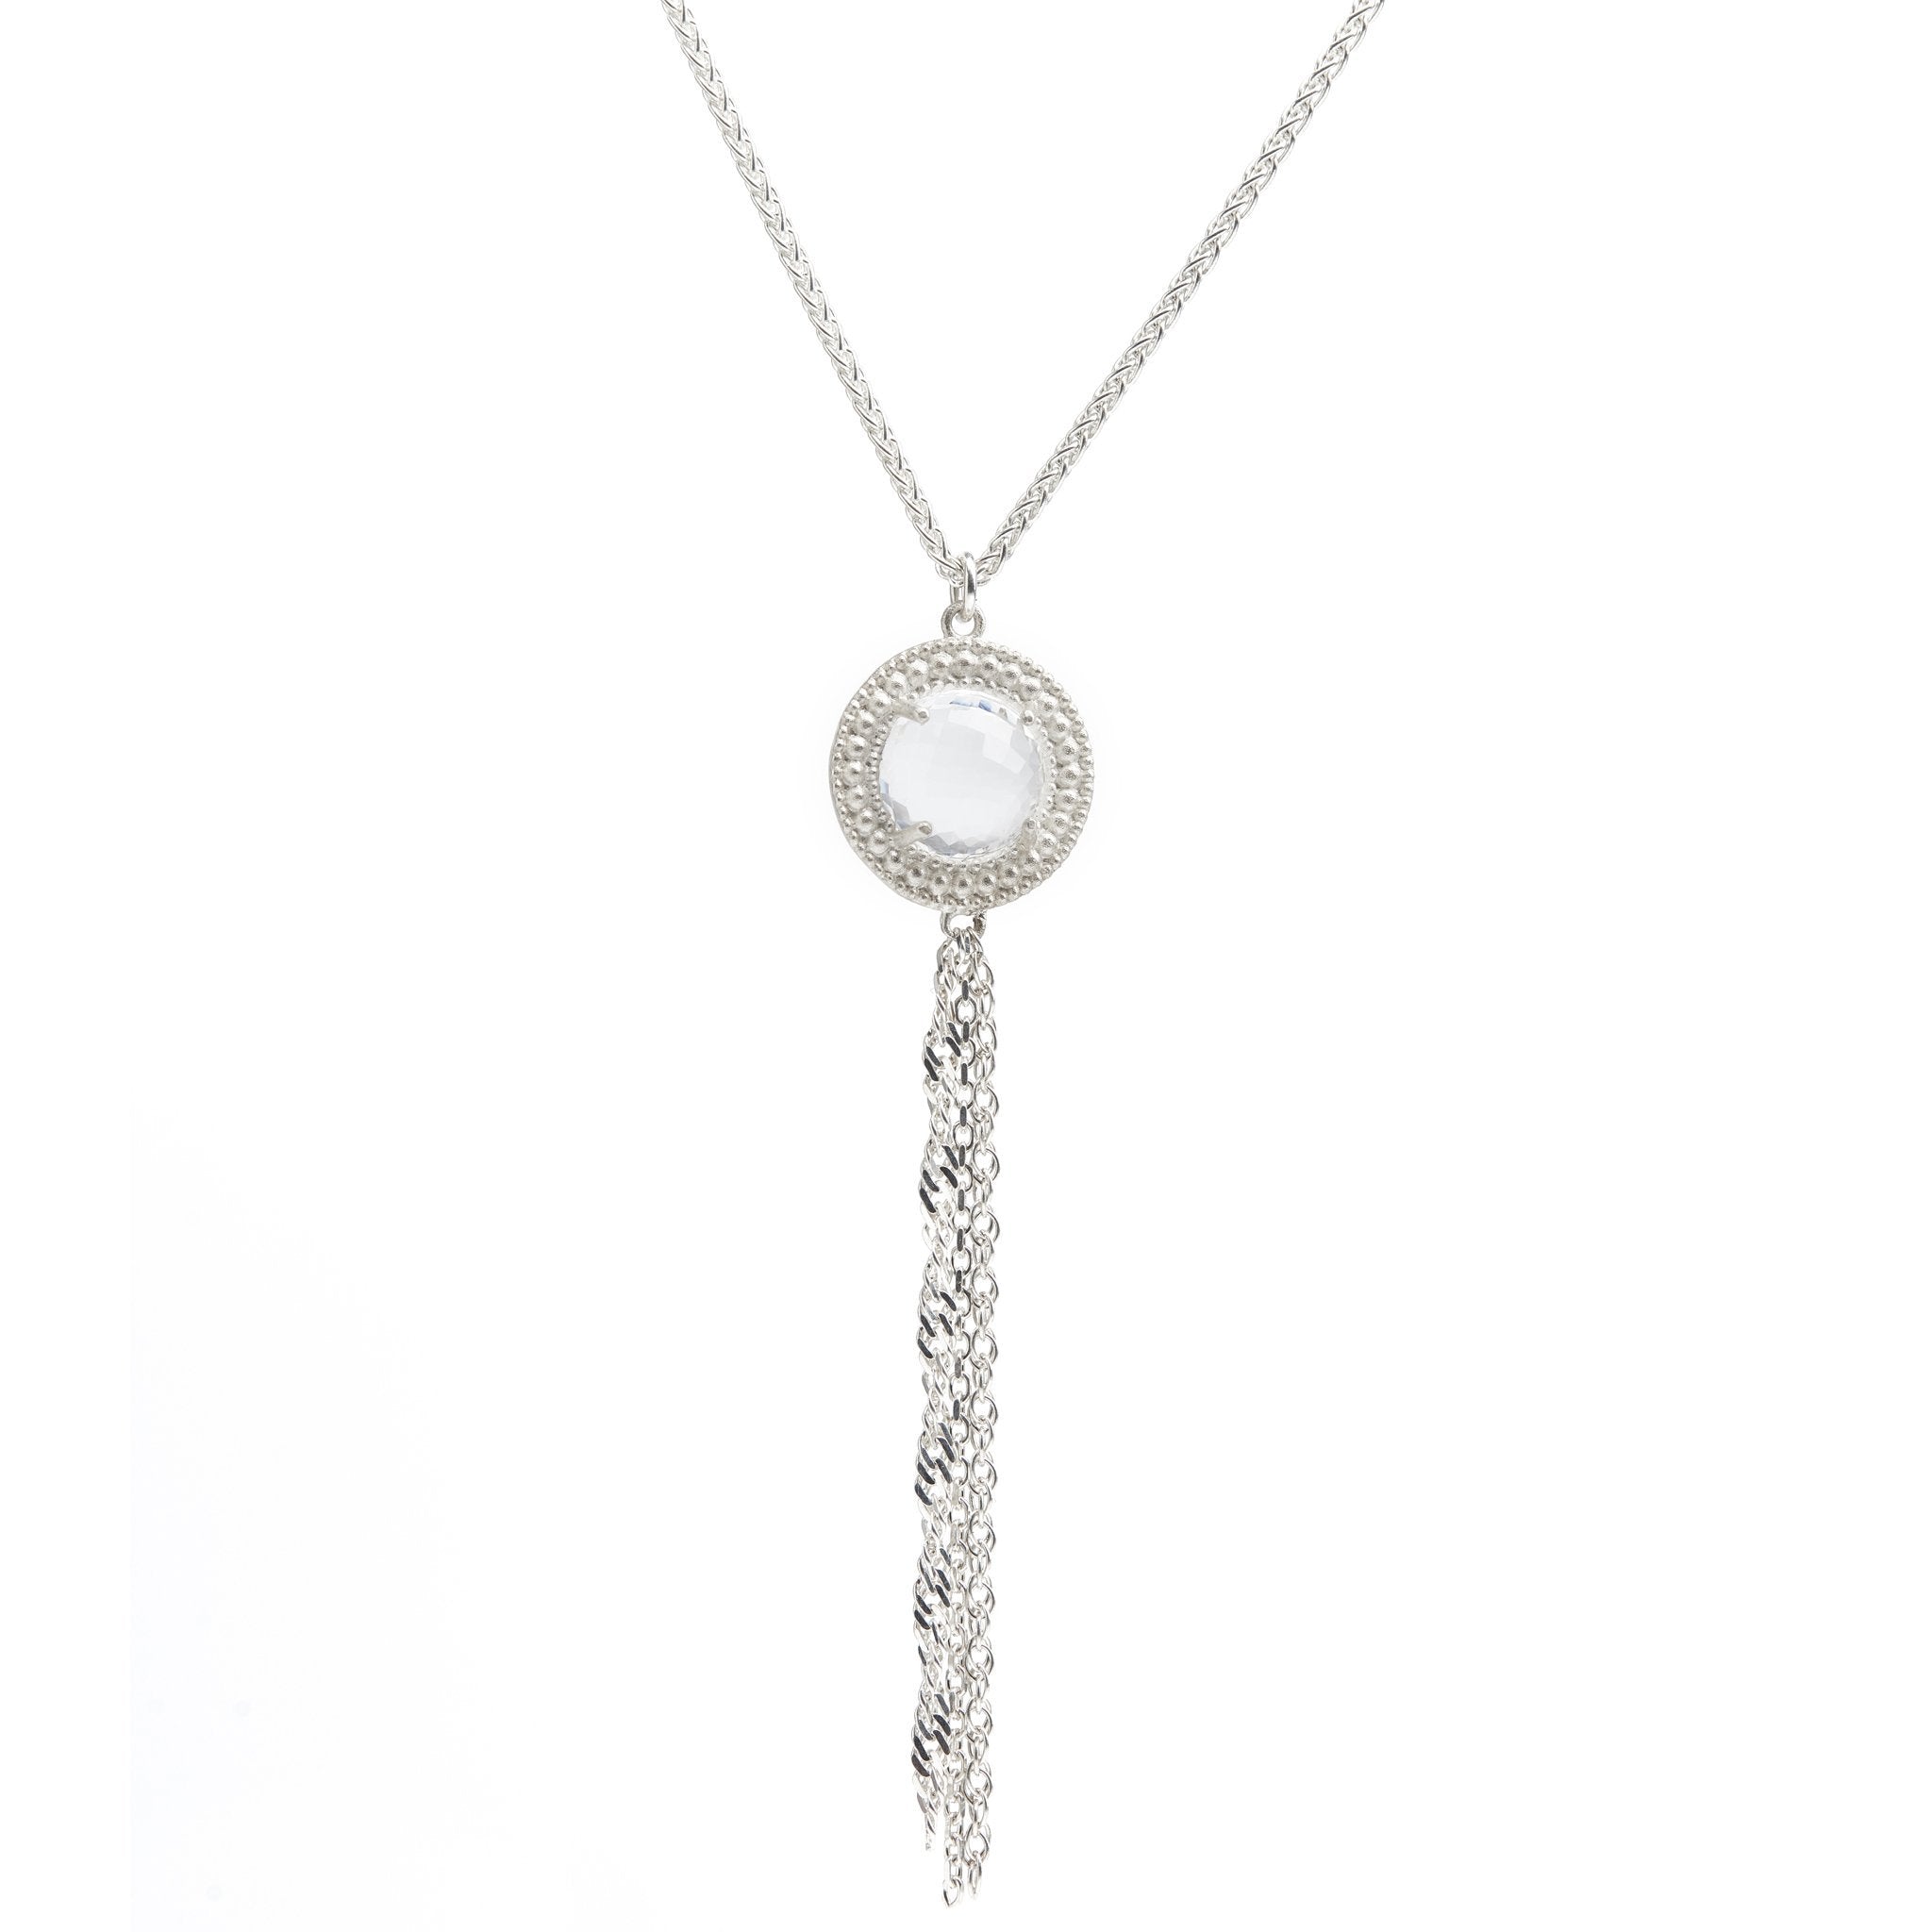 The Renaissance Ethnic necklace with a disco ball crystal quartz - Christelle Chamberland